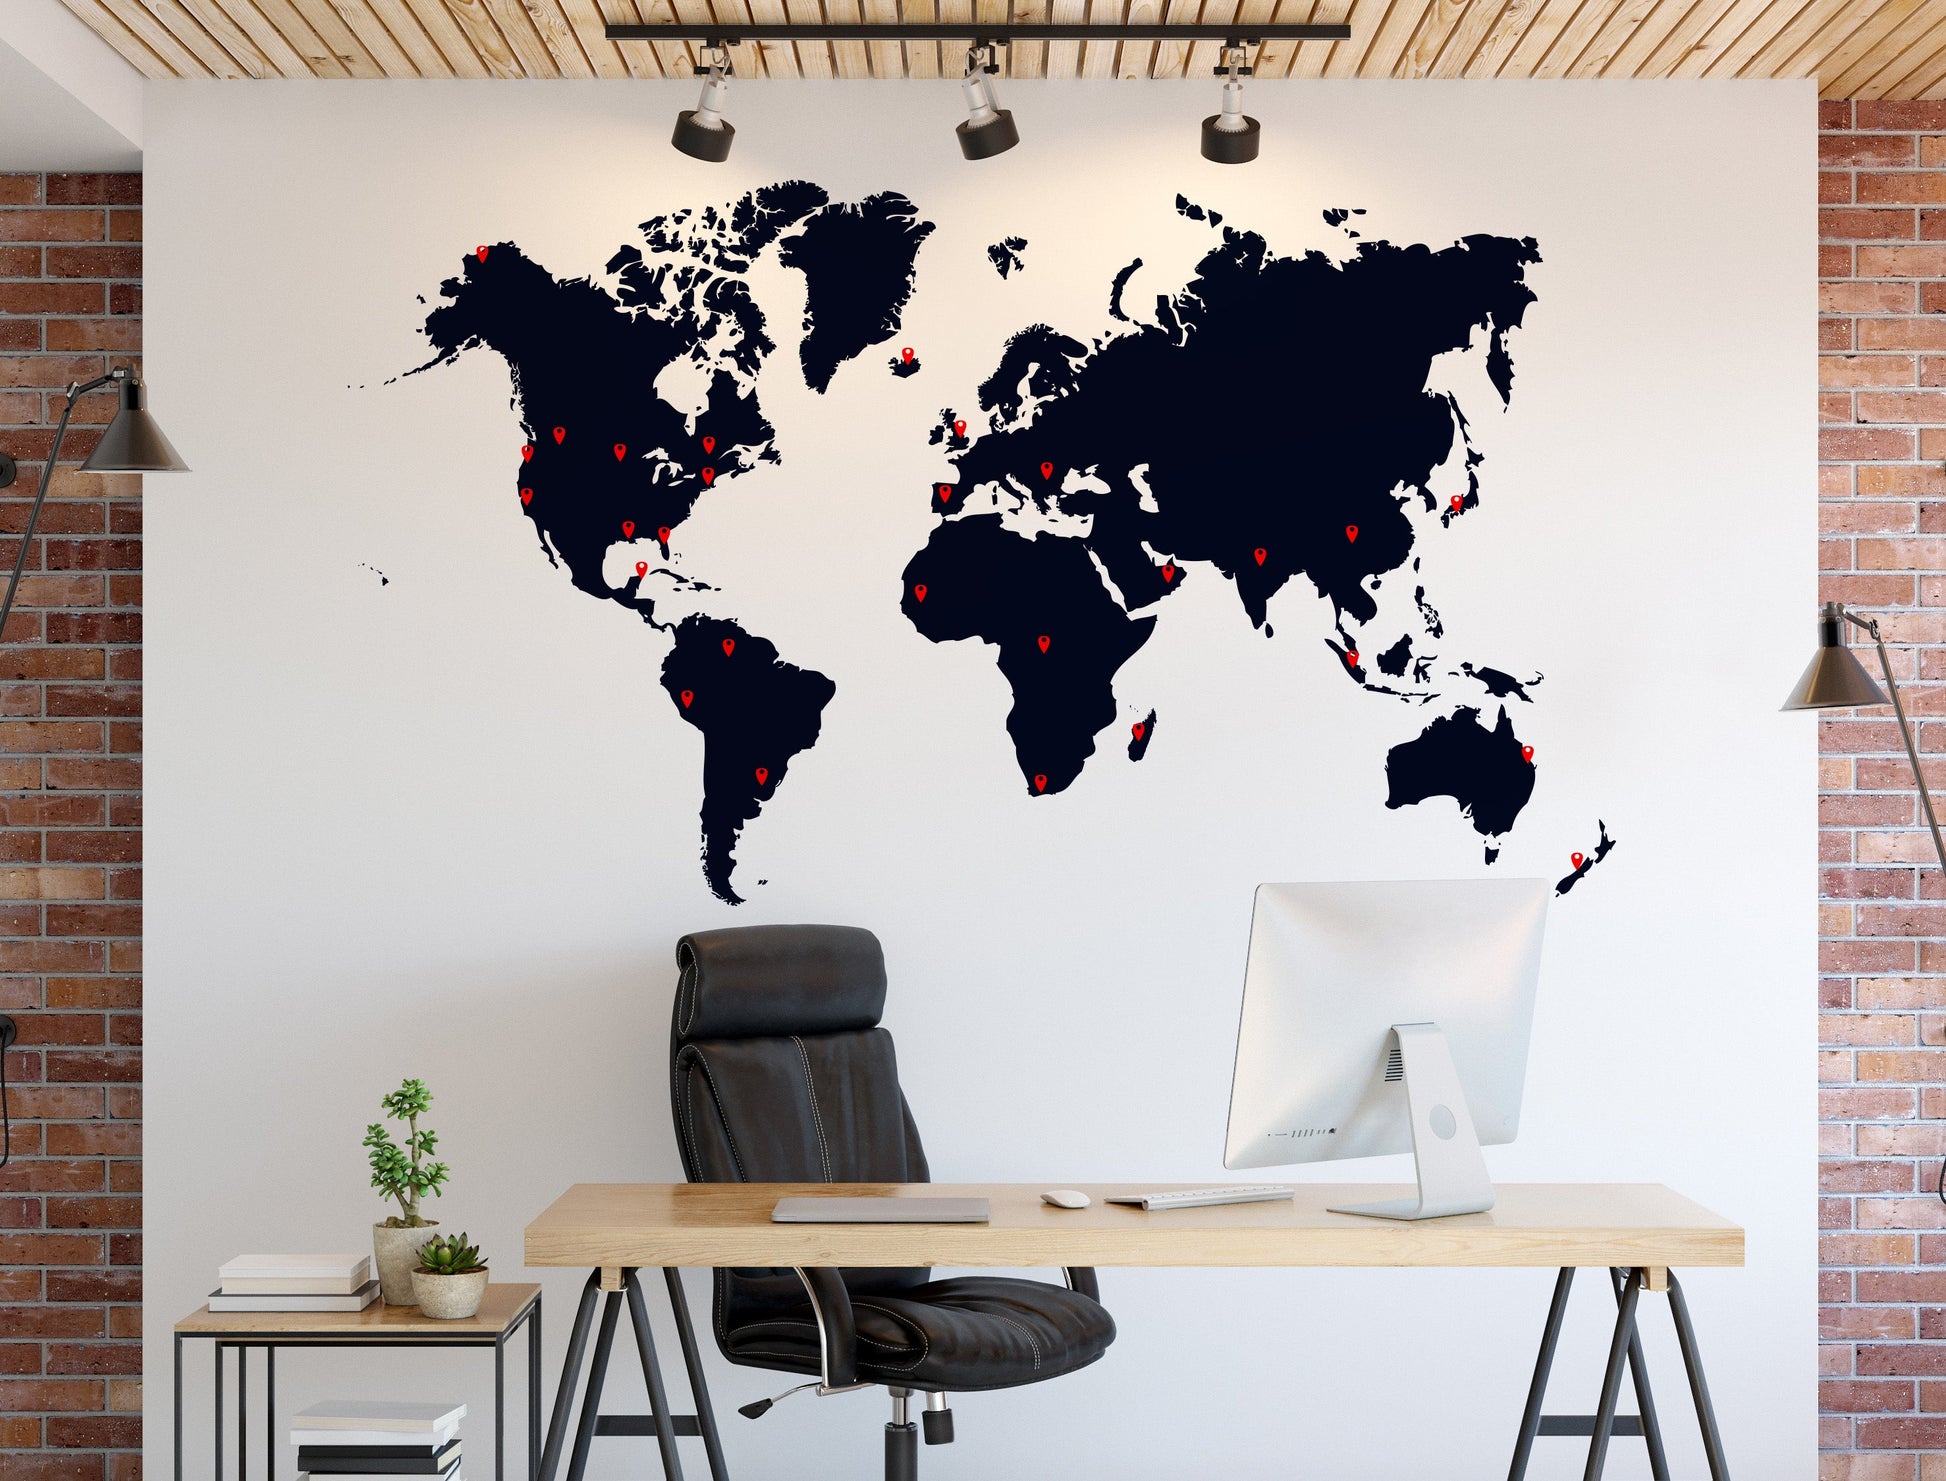 Black world map wall decal on office wall, stylish and informative decor.